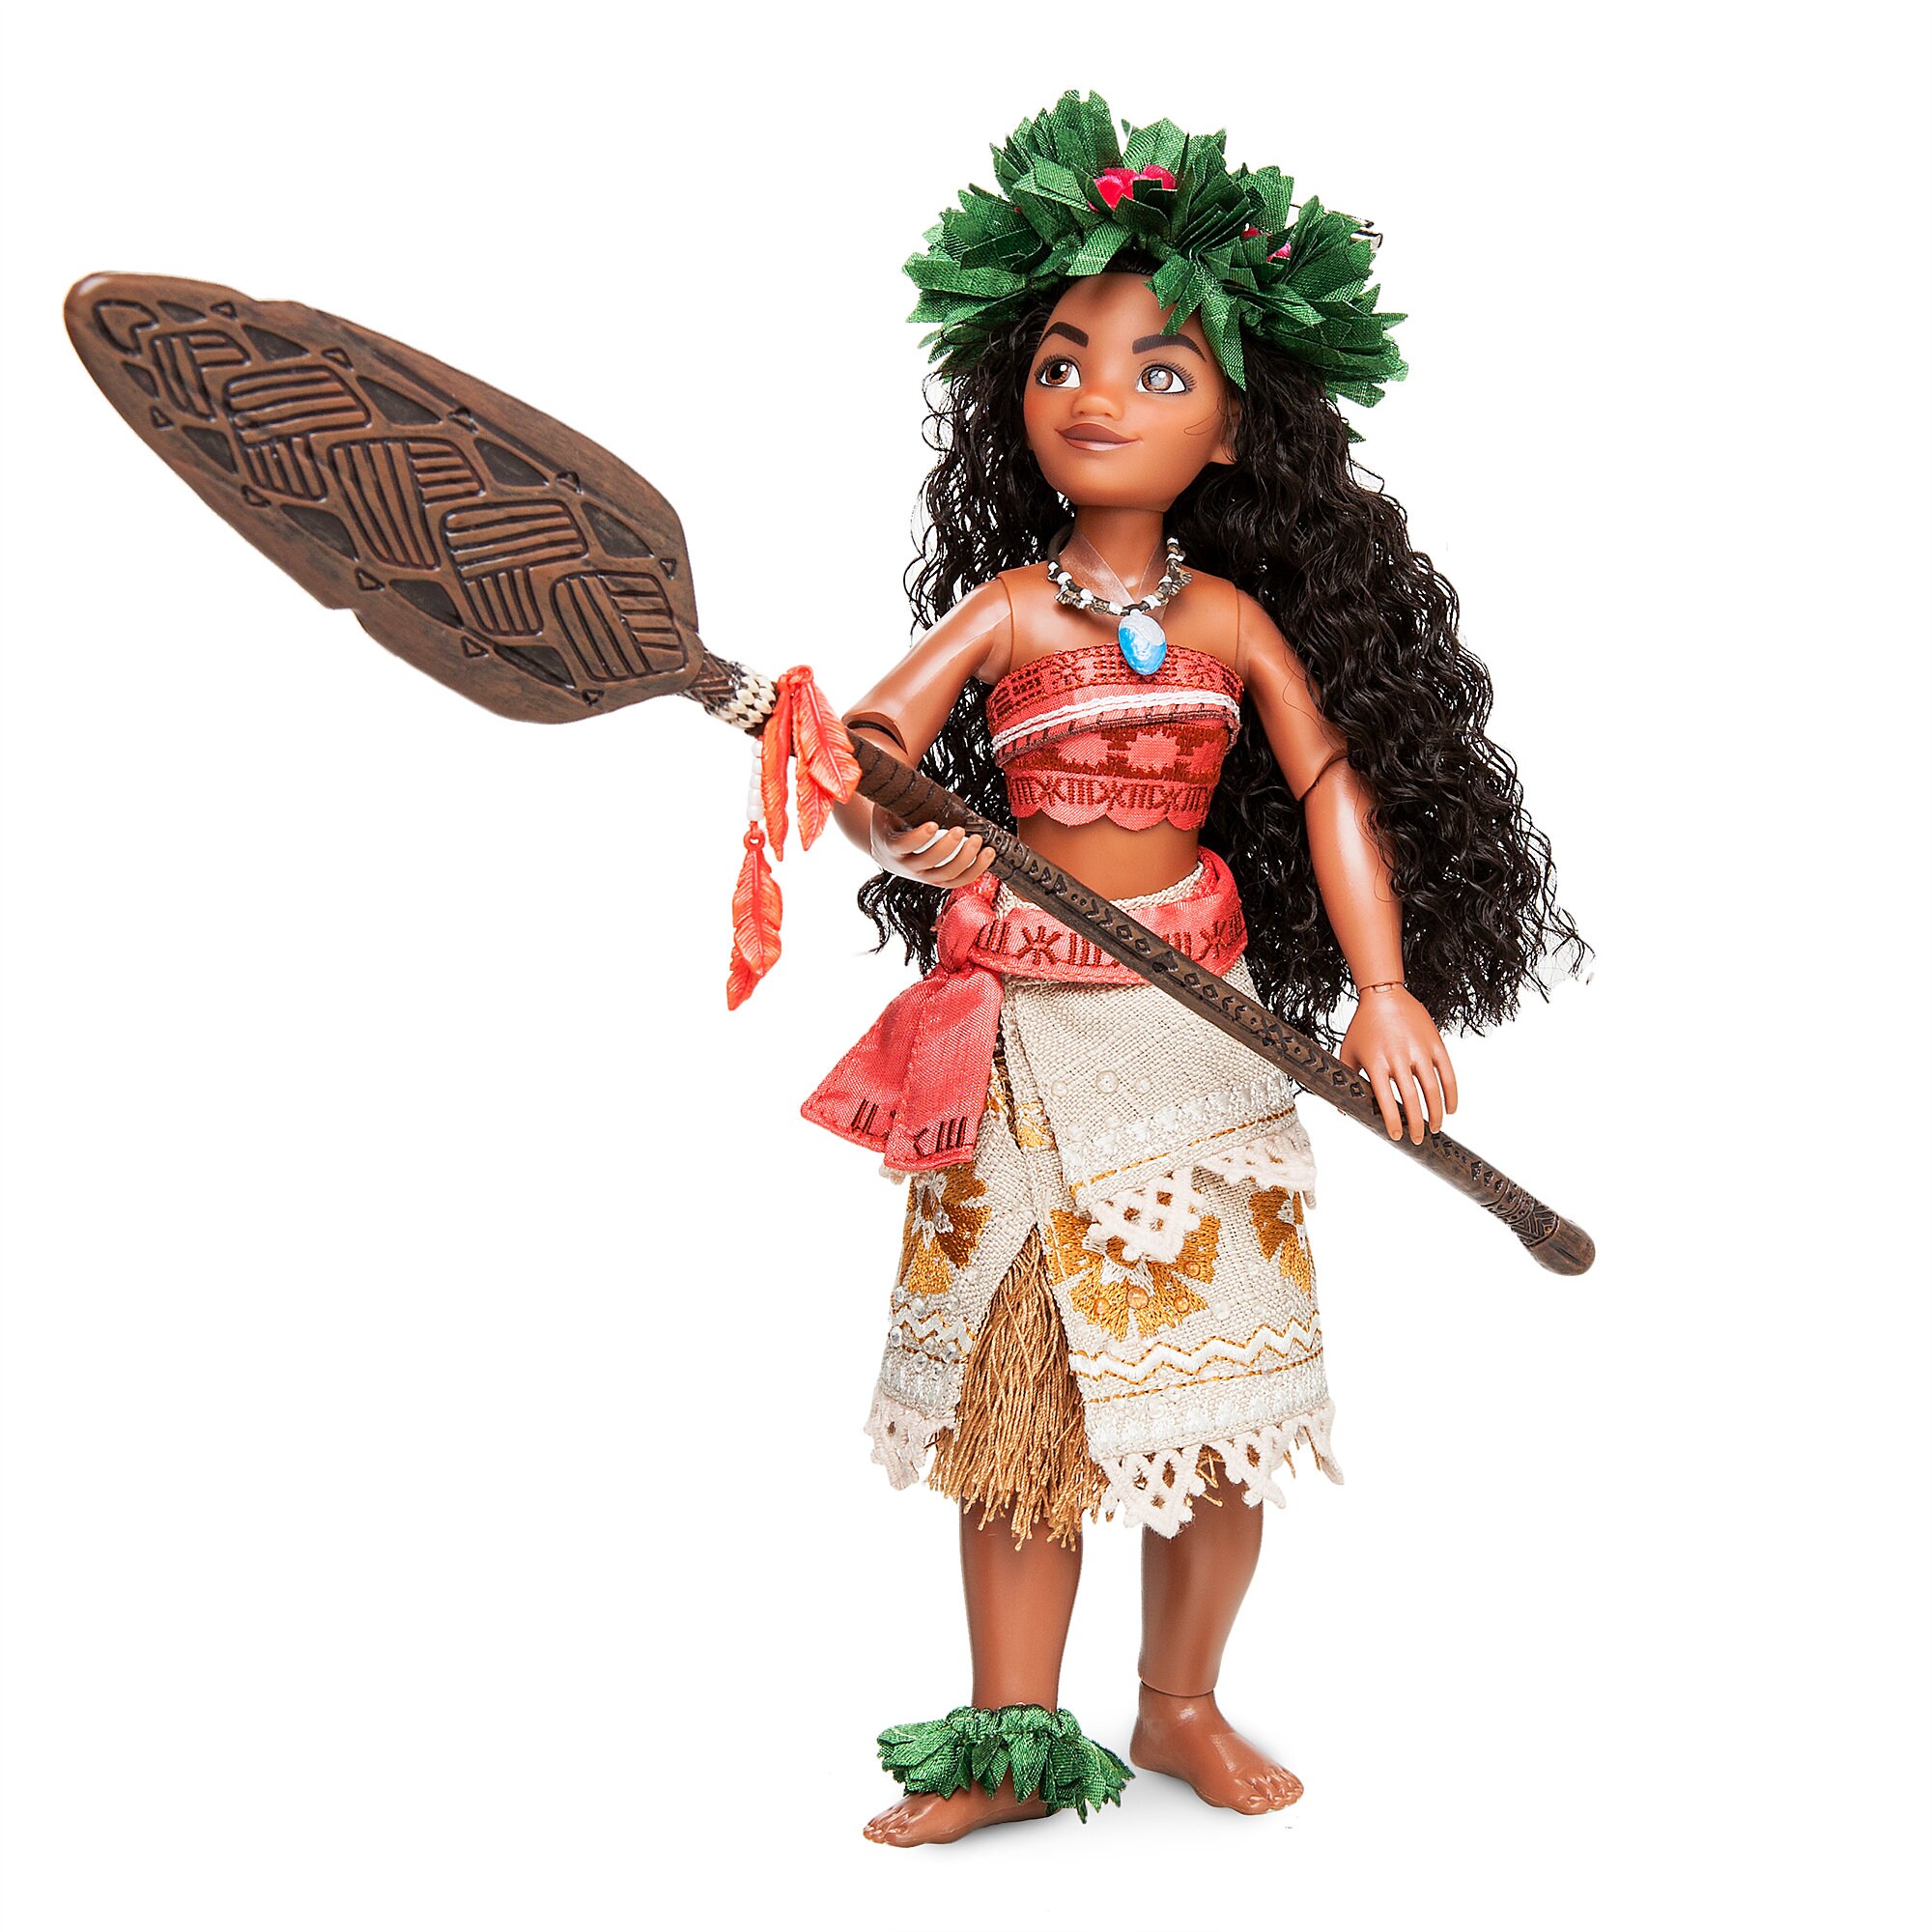 Moana and Hei Hei Doll Set - Disney Designer Fairytale Collection - Limited Edition